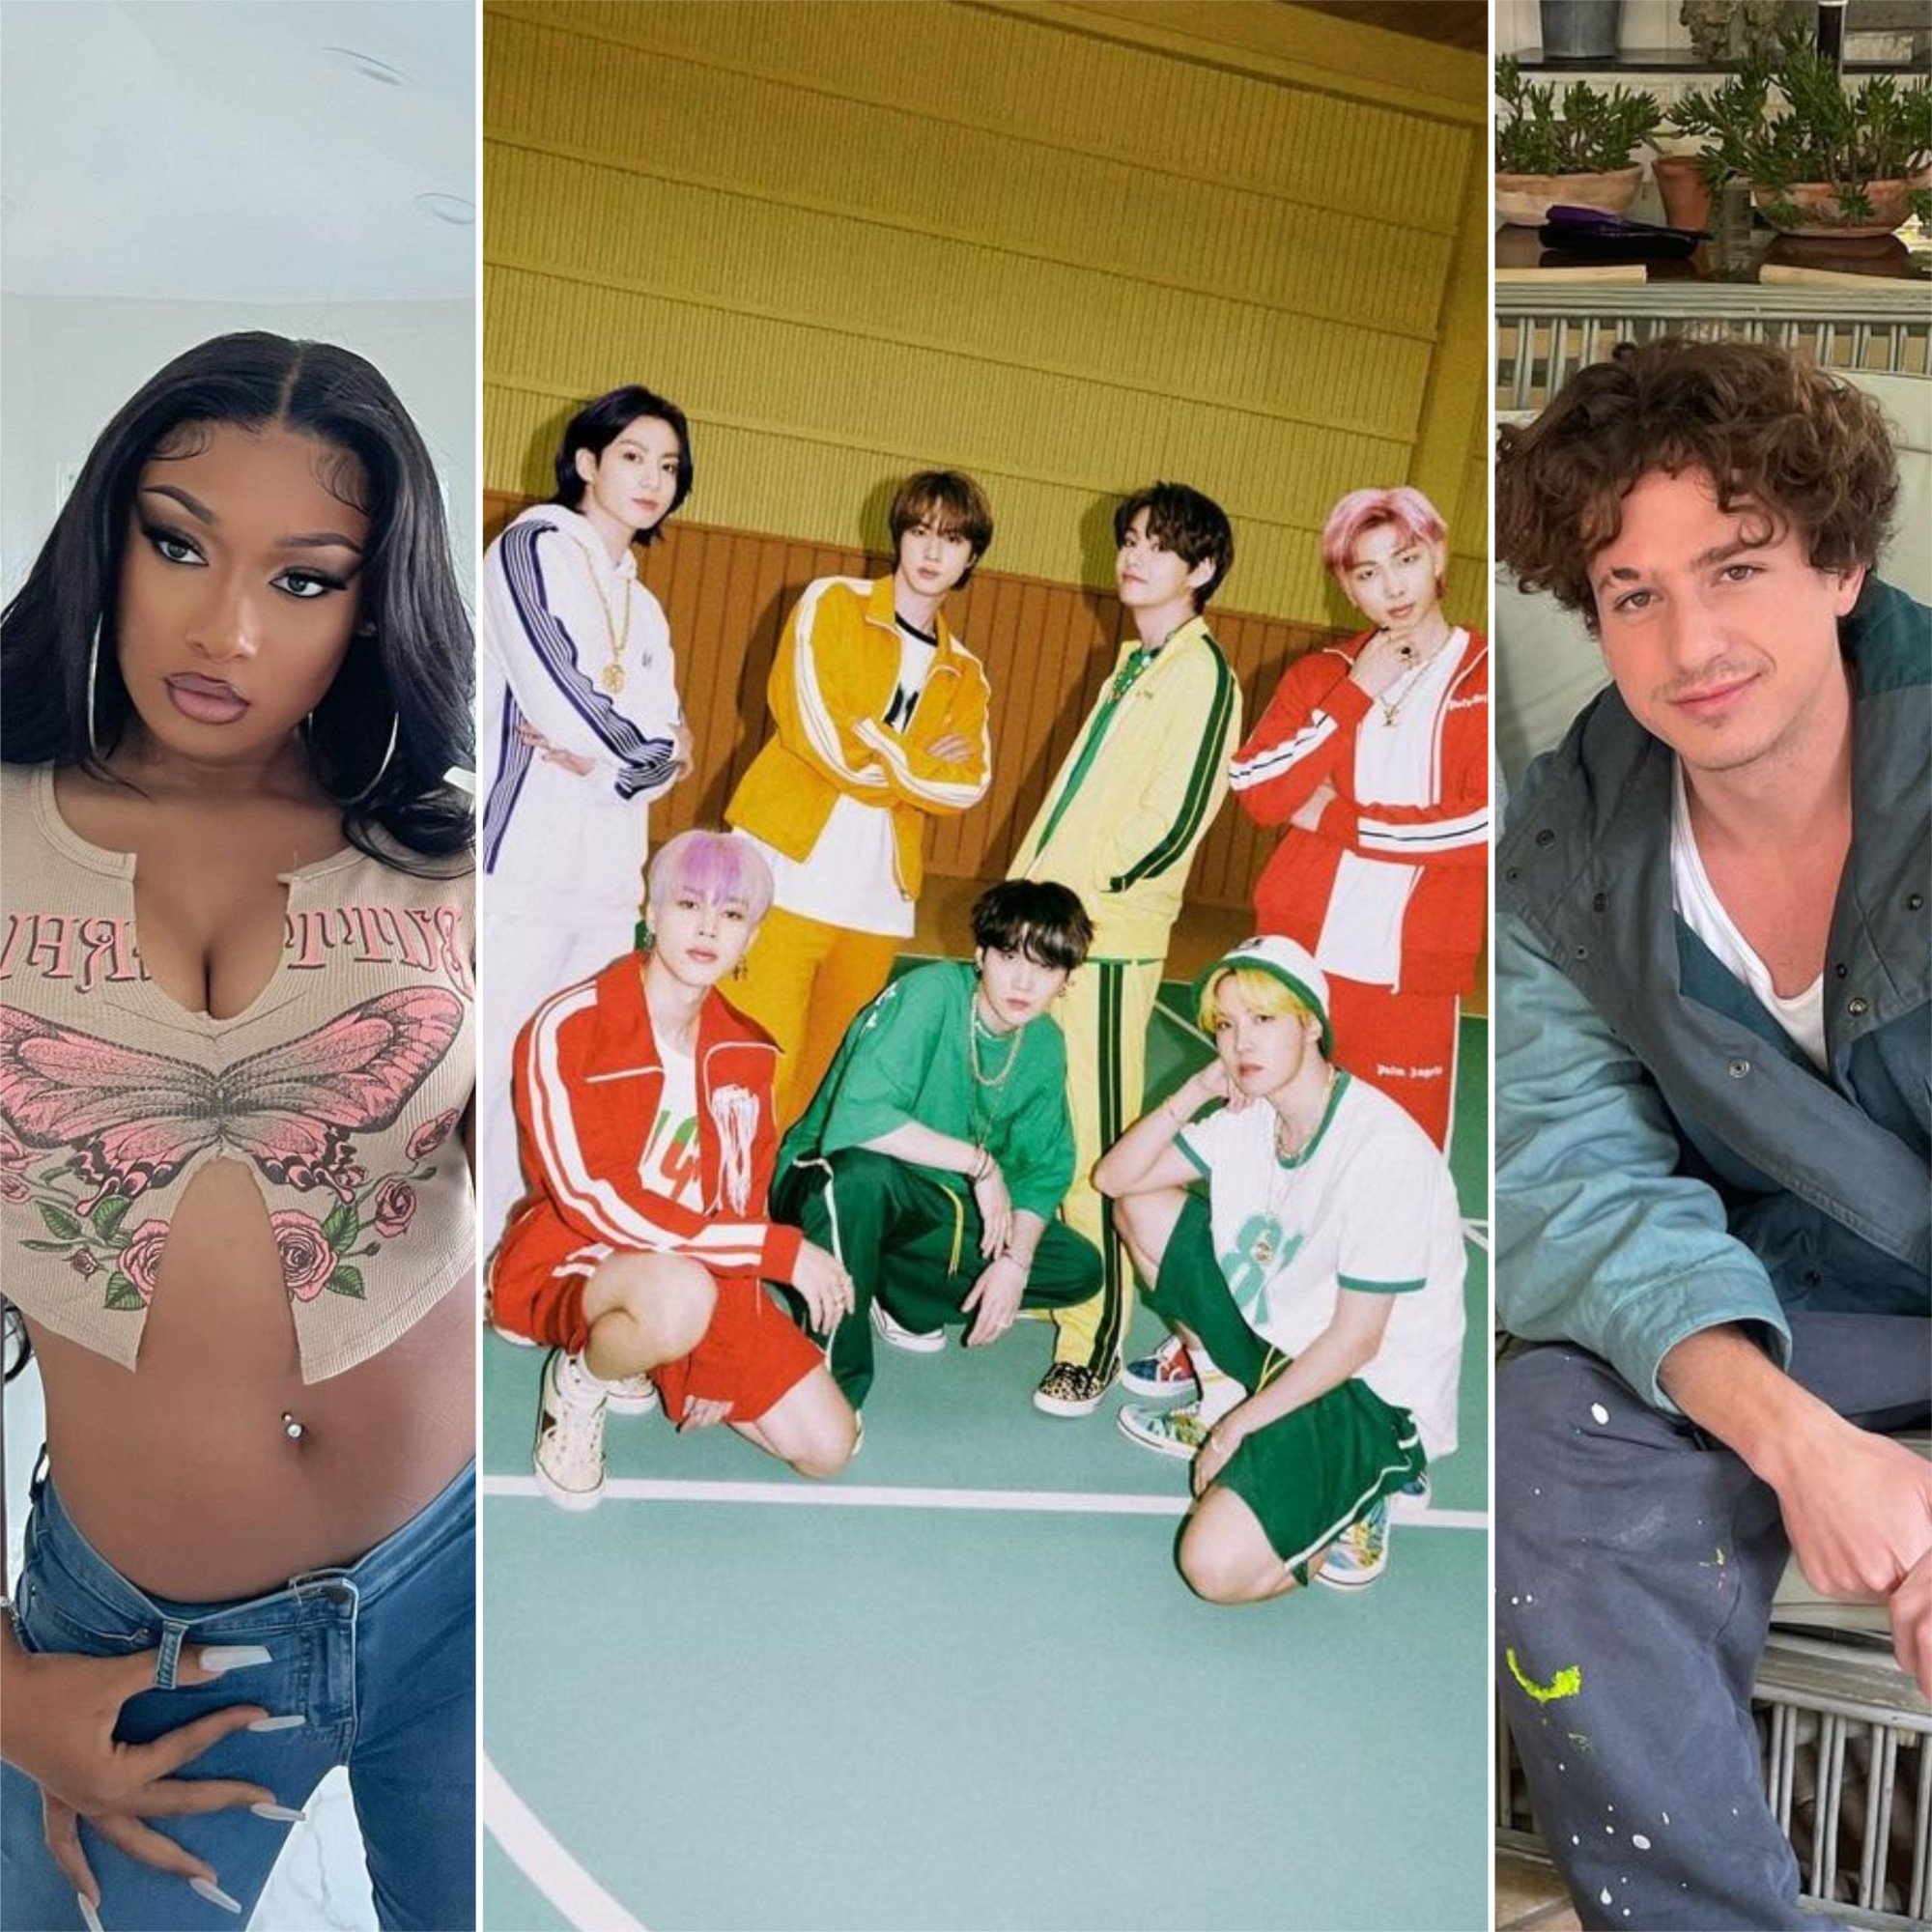 BTS appear to be pretty tight with Megan Thee Stallion and Charlie Puth. Photos: @theestallion, @bts.bighitofficial, @charlieputh/Instagram